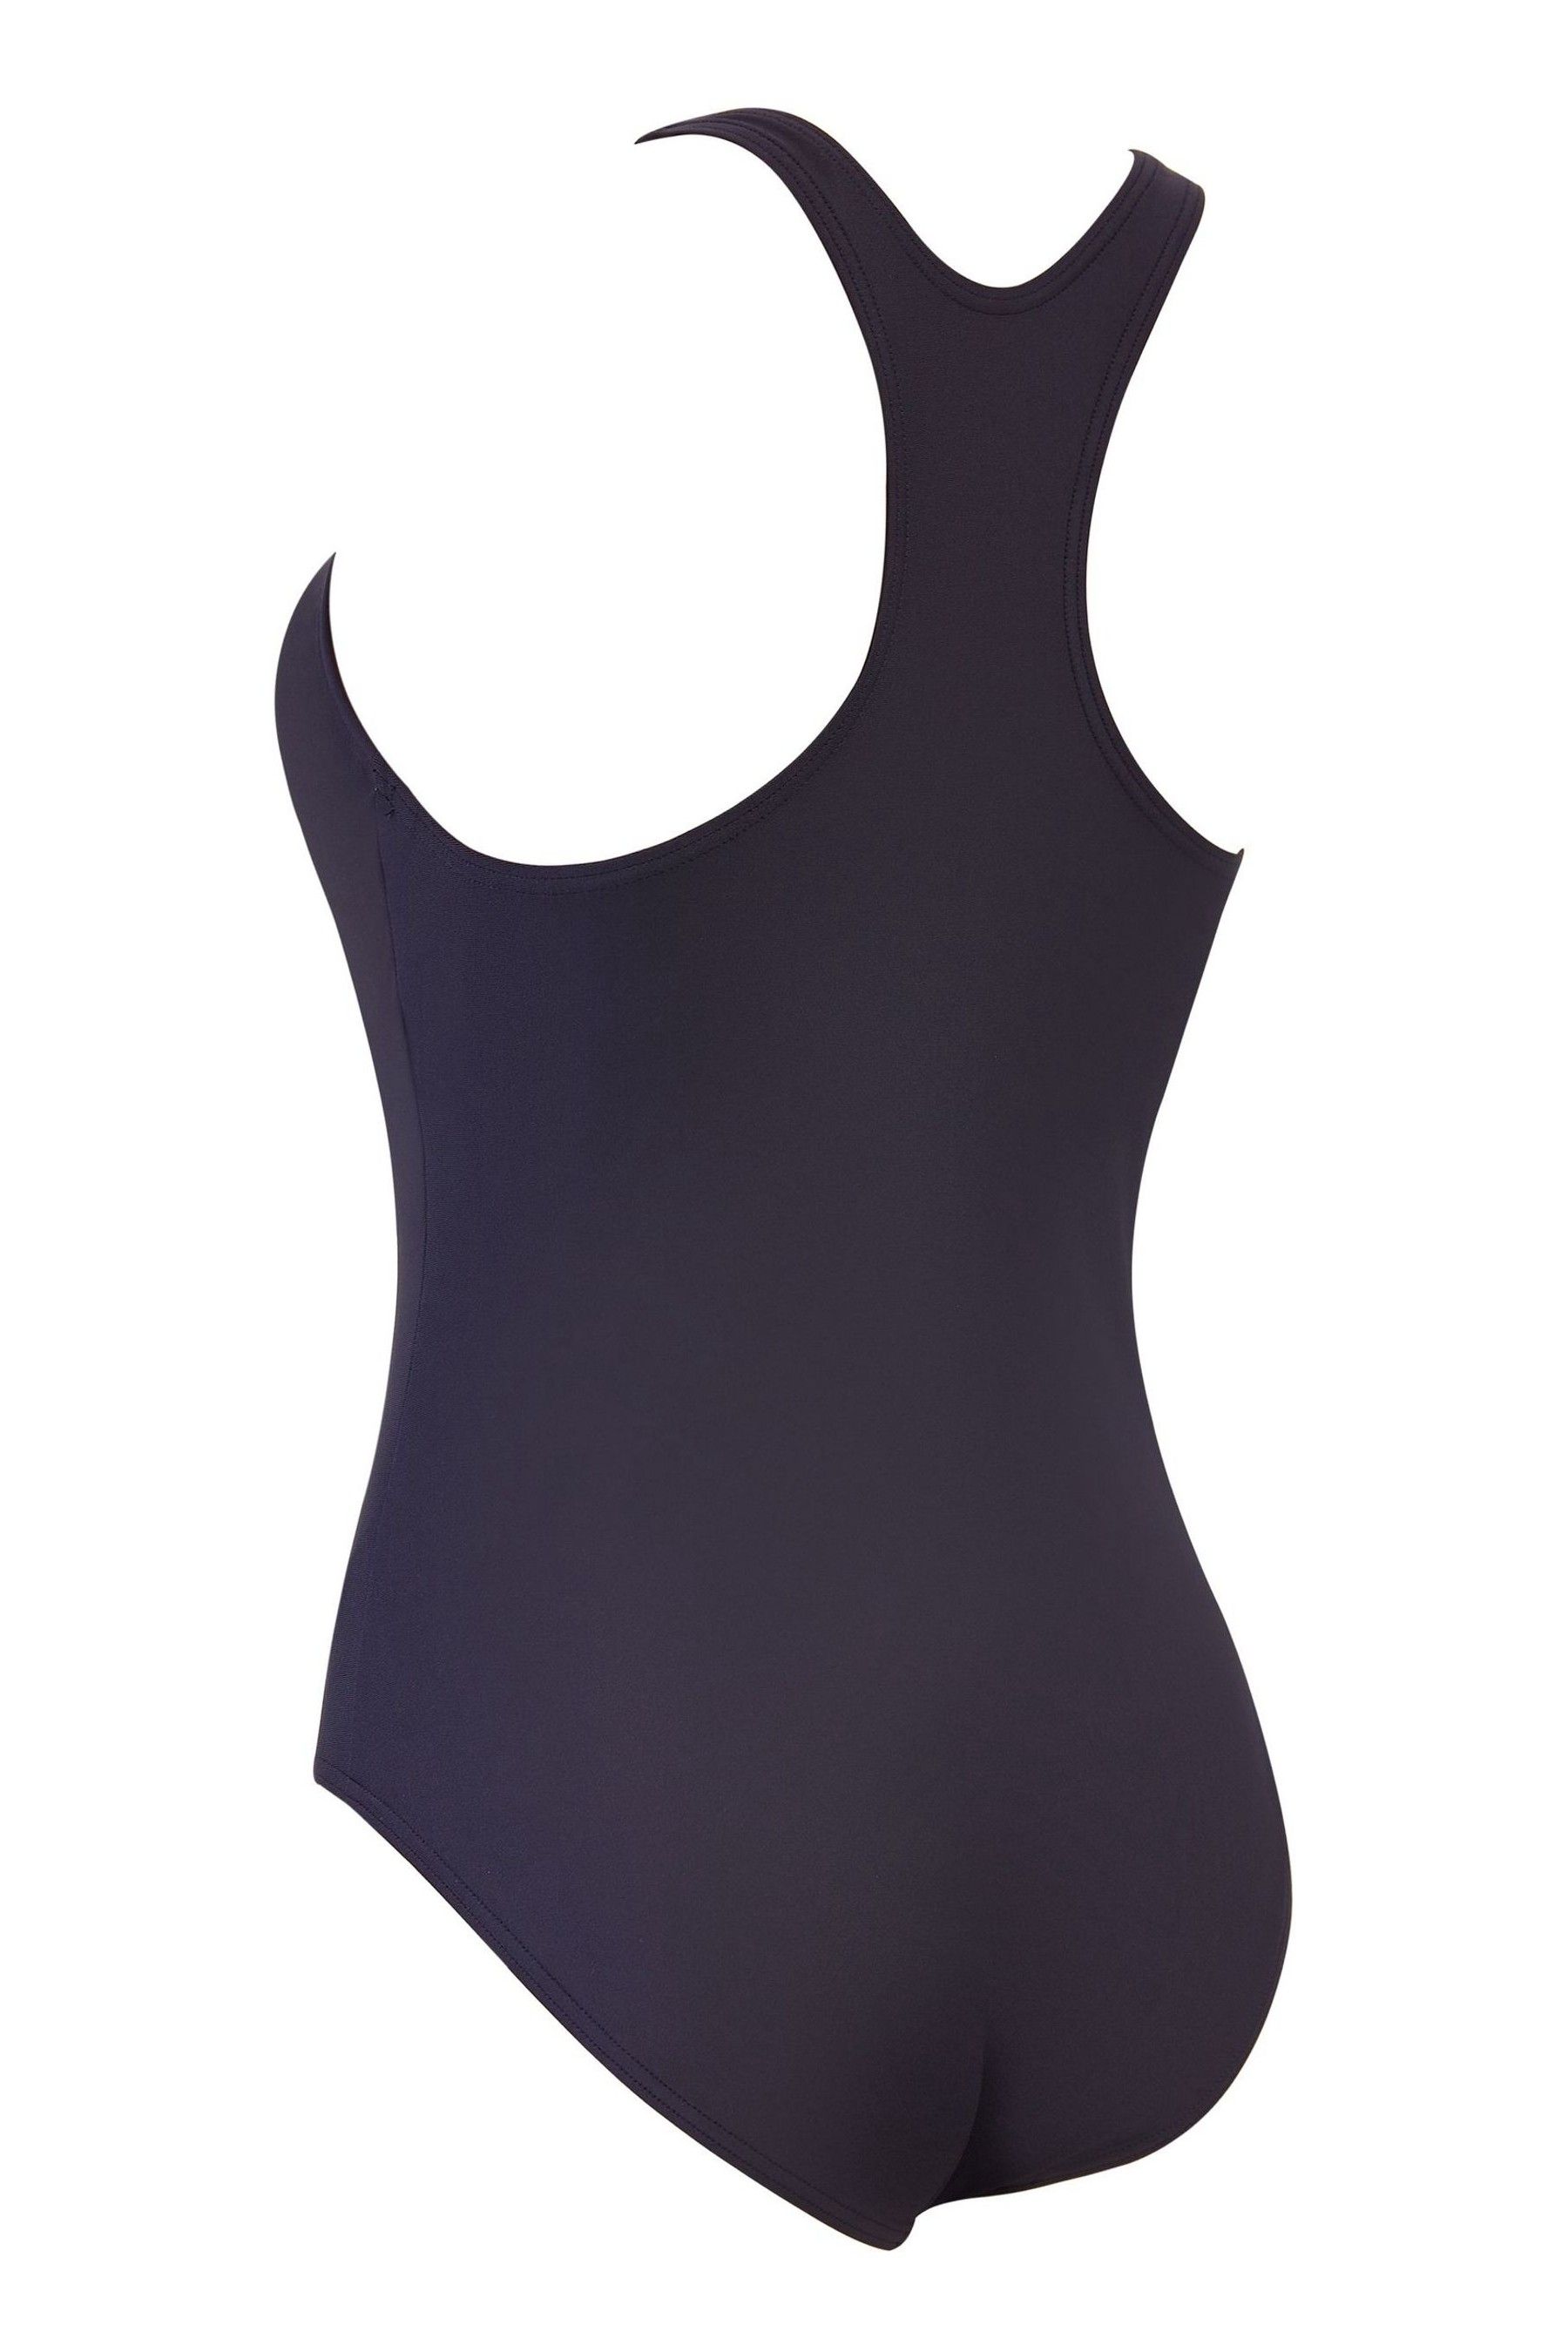 Buy Zoggs Black Coogee Sonicback One Piece Swimsuit from the Next UK ...